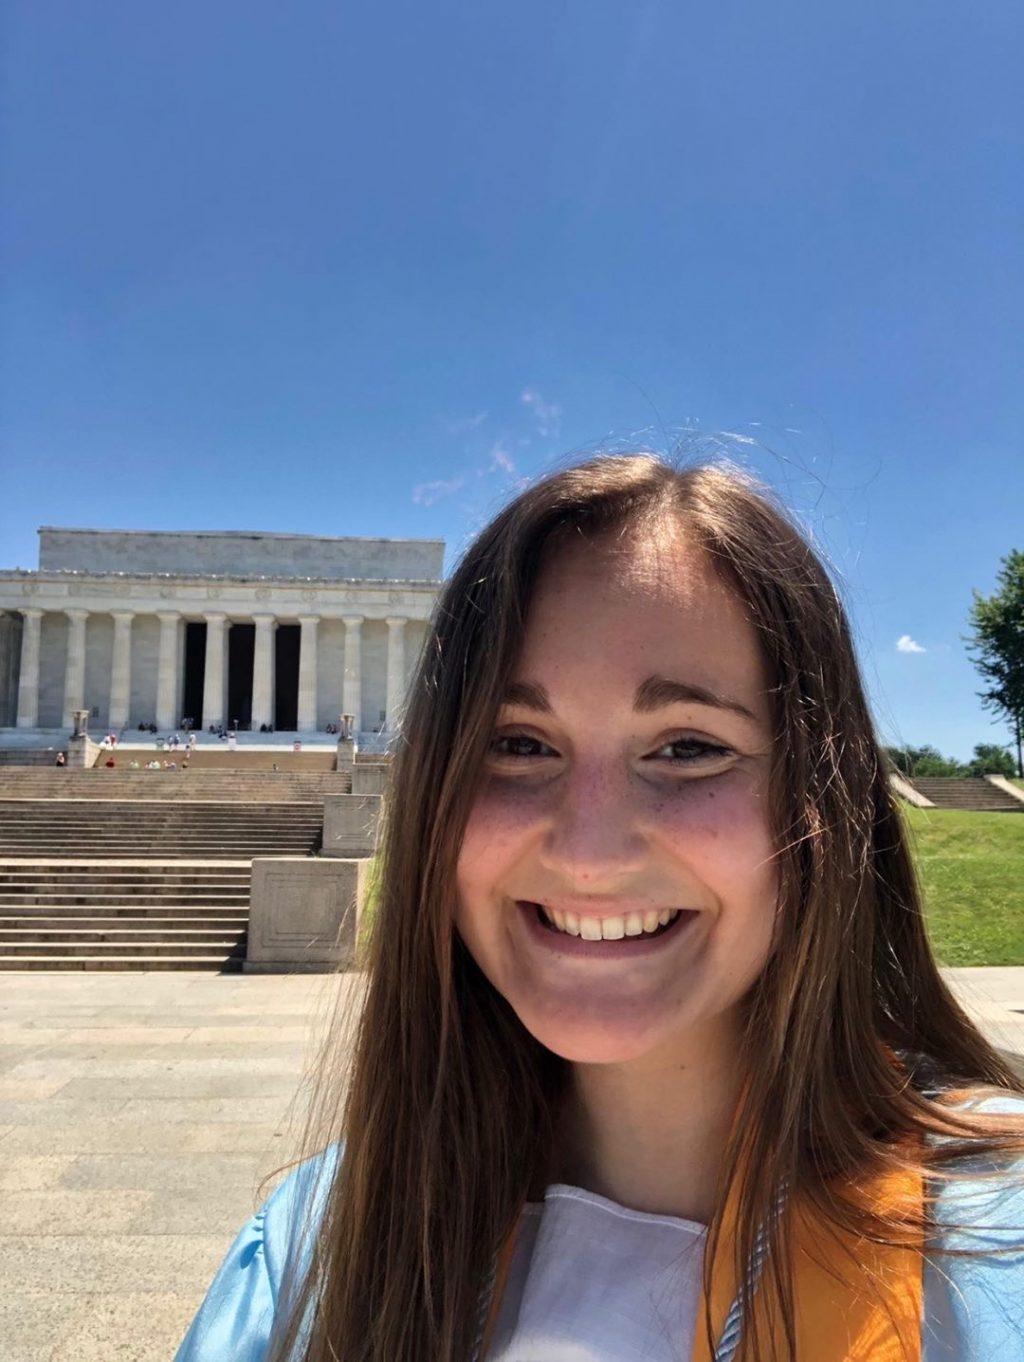 Henshaw smiles in front of the Lincoln Memorial in Washington, D.C. When she gets to Malibu, she said she is thrilled to spend time at the many beaches near Pepperdine.